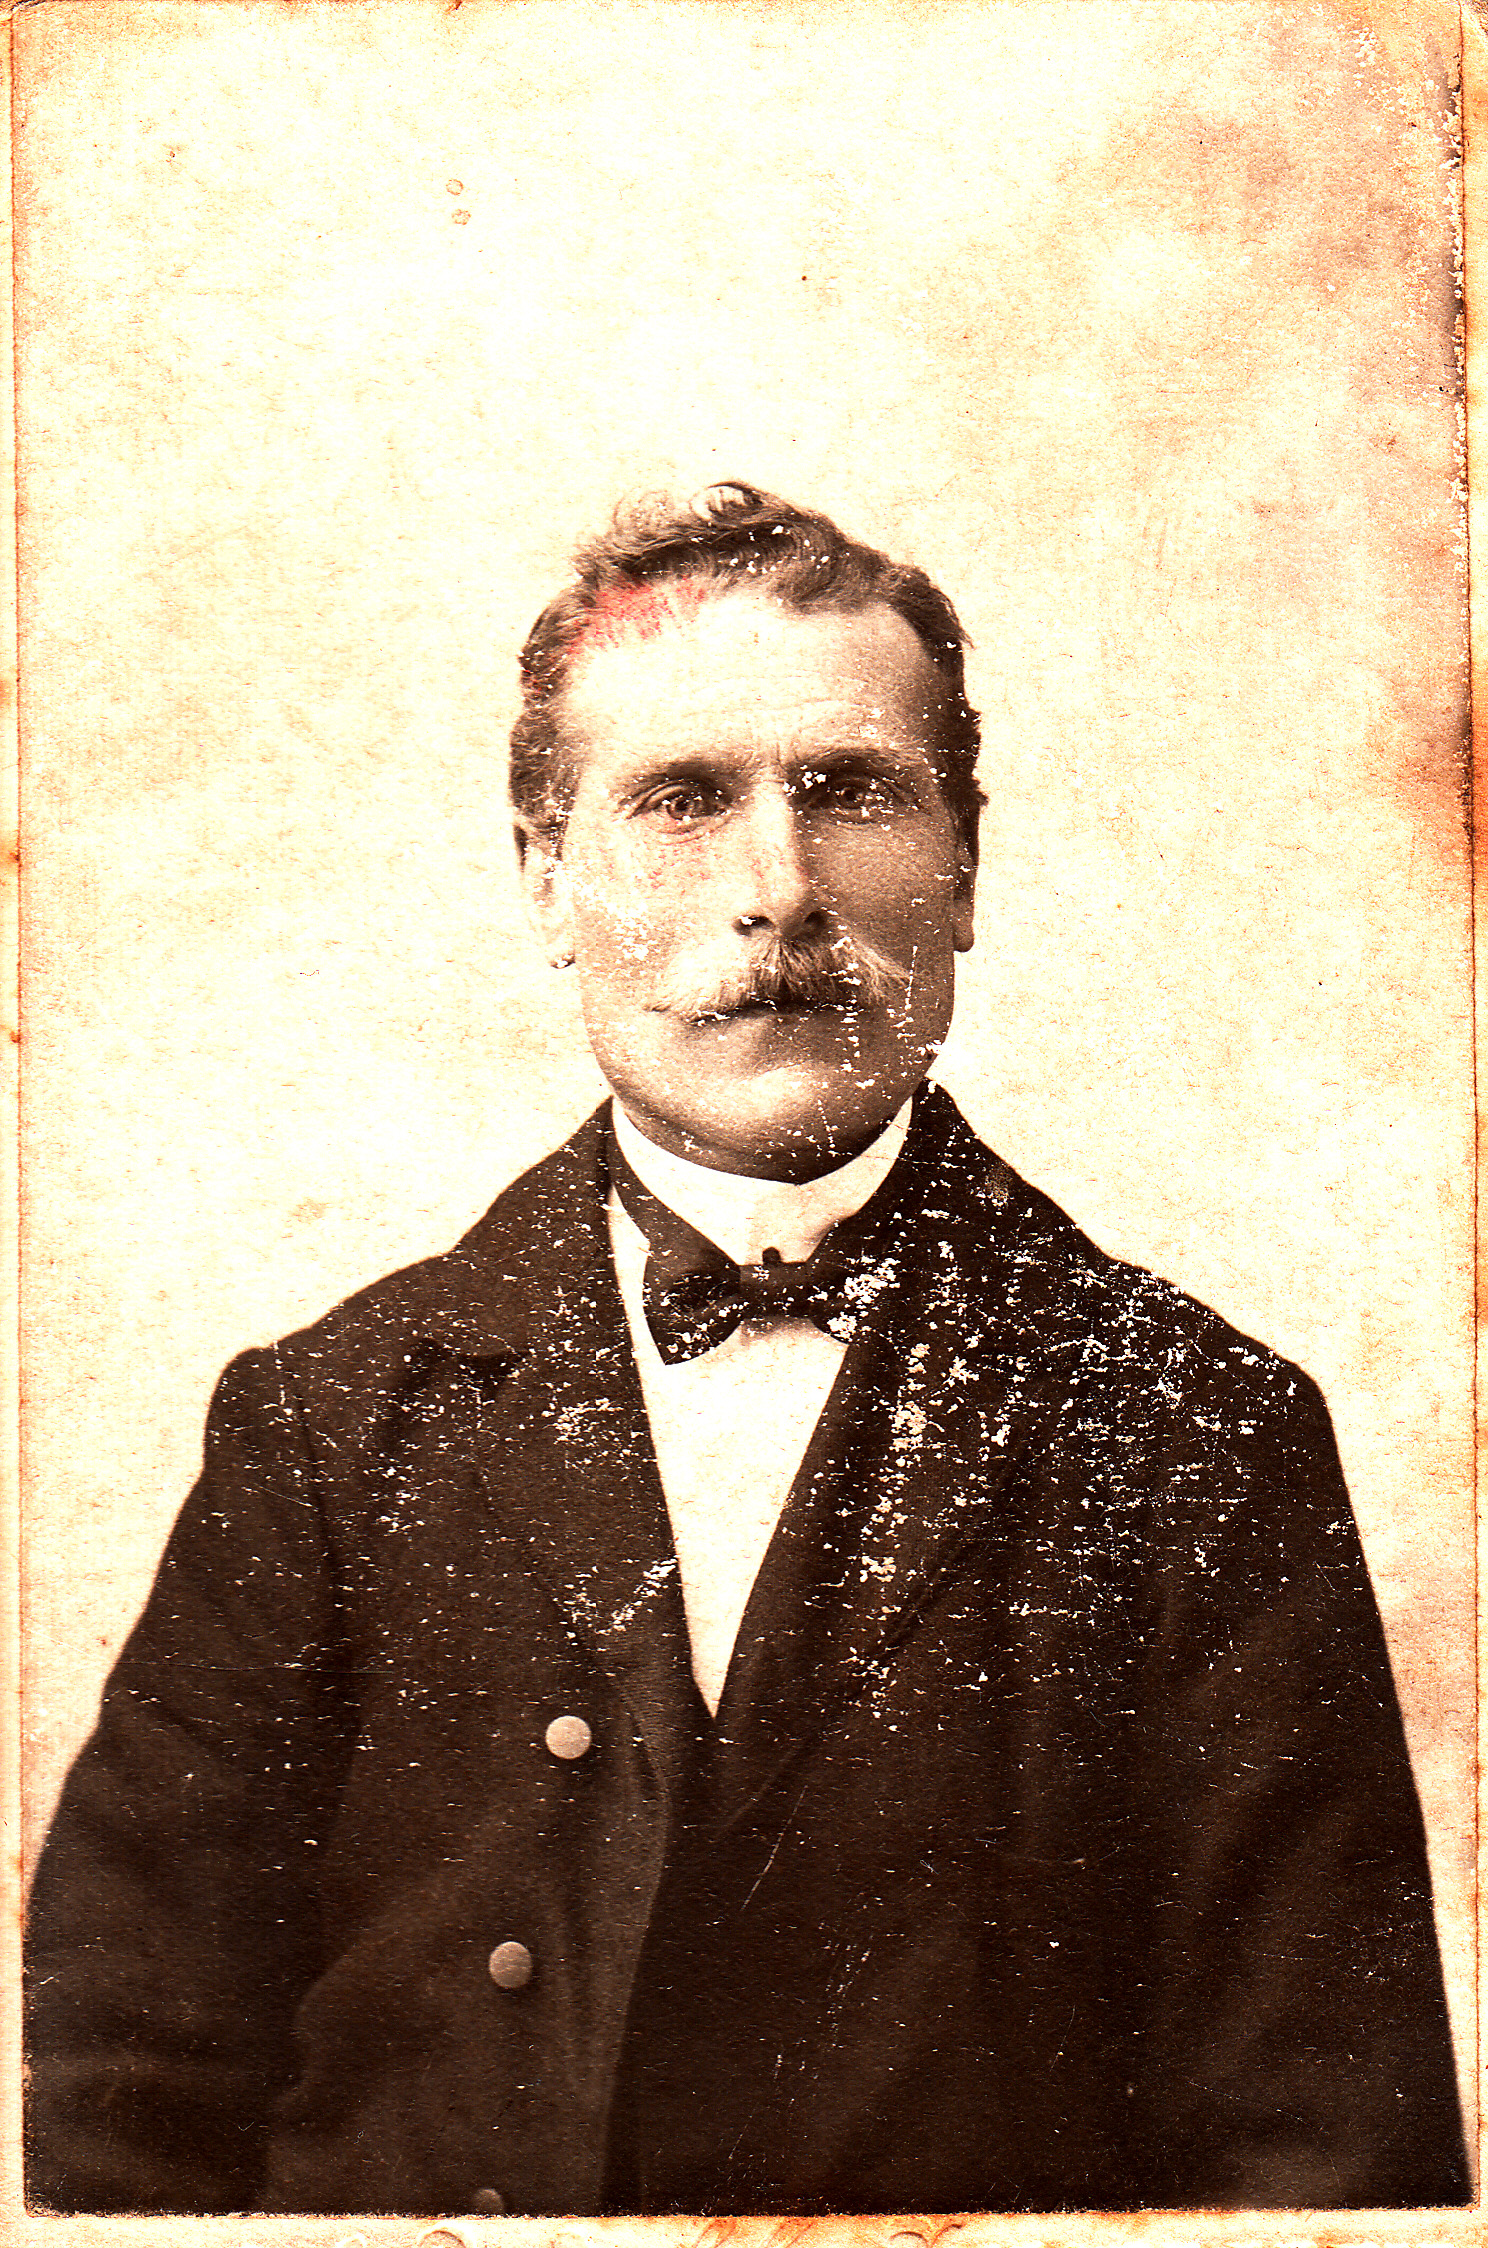 an old pograph of a man in a black suit and bow tie